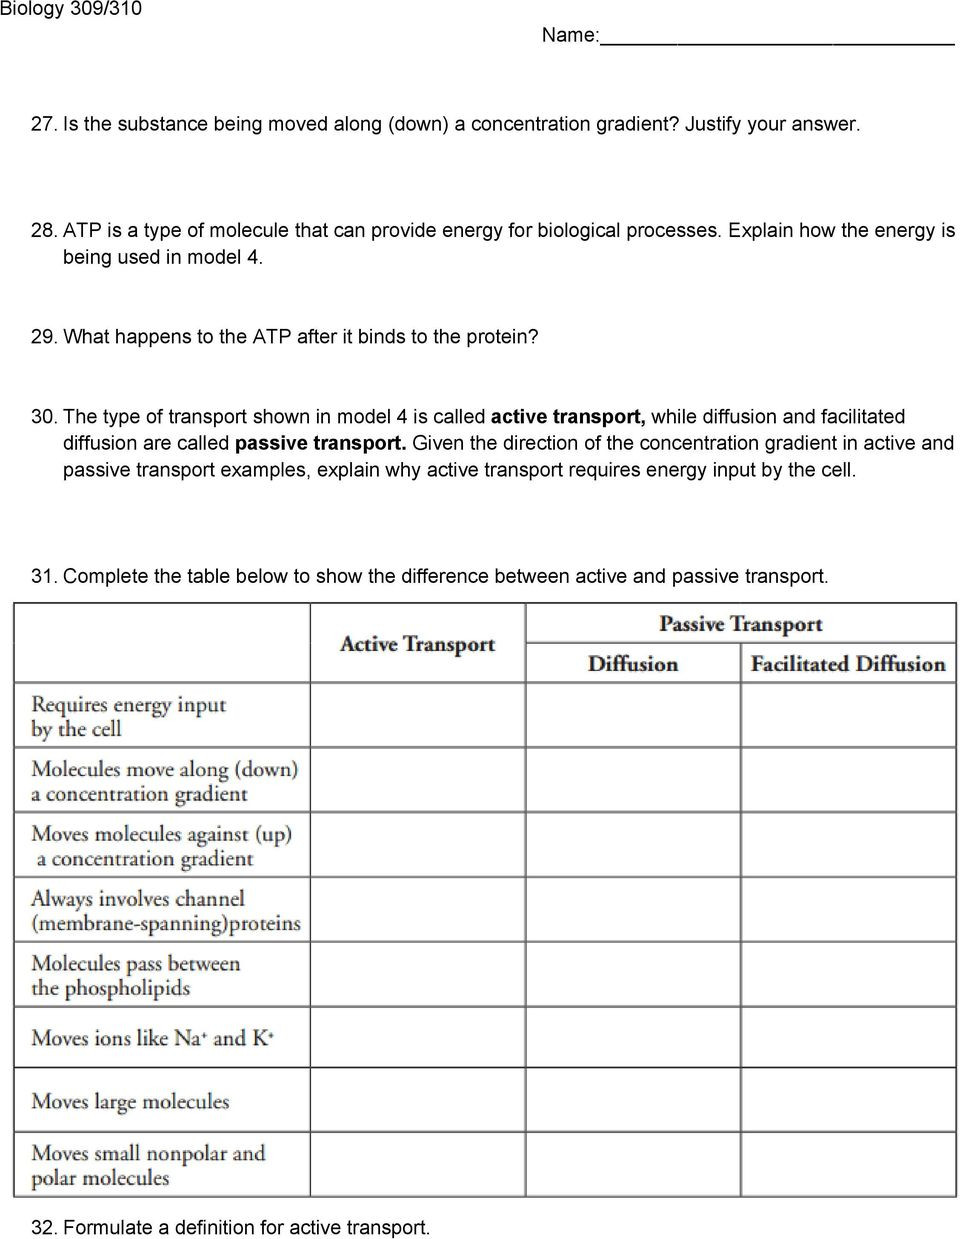 Cell Transport Review Worksheet Cell Transport and Plasma Membrane Structure Pdf Free Download